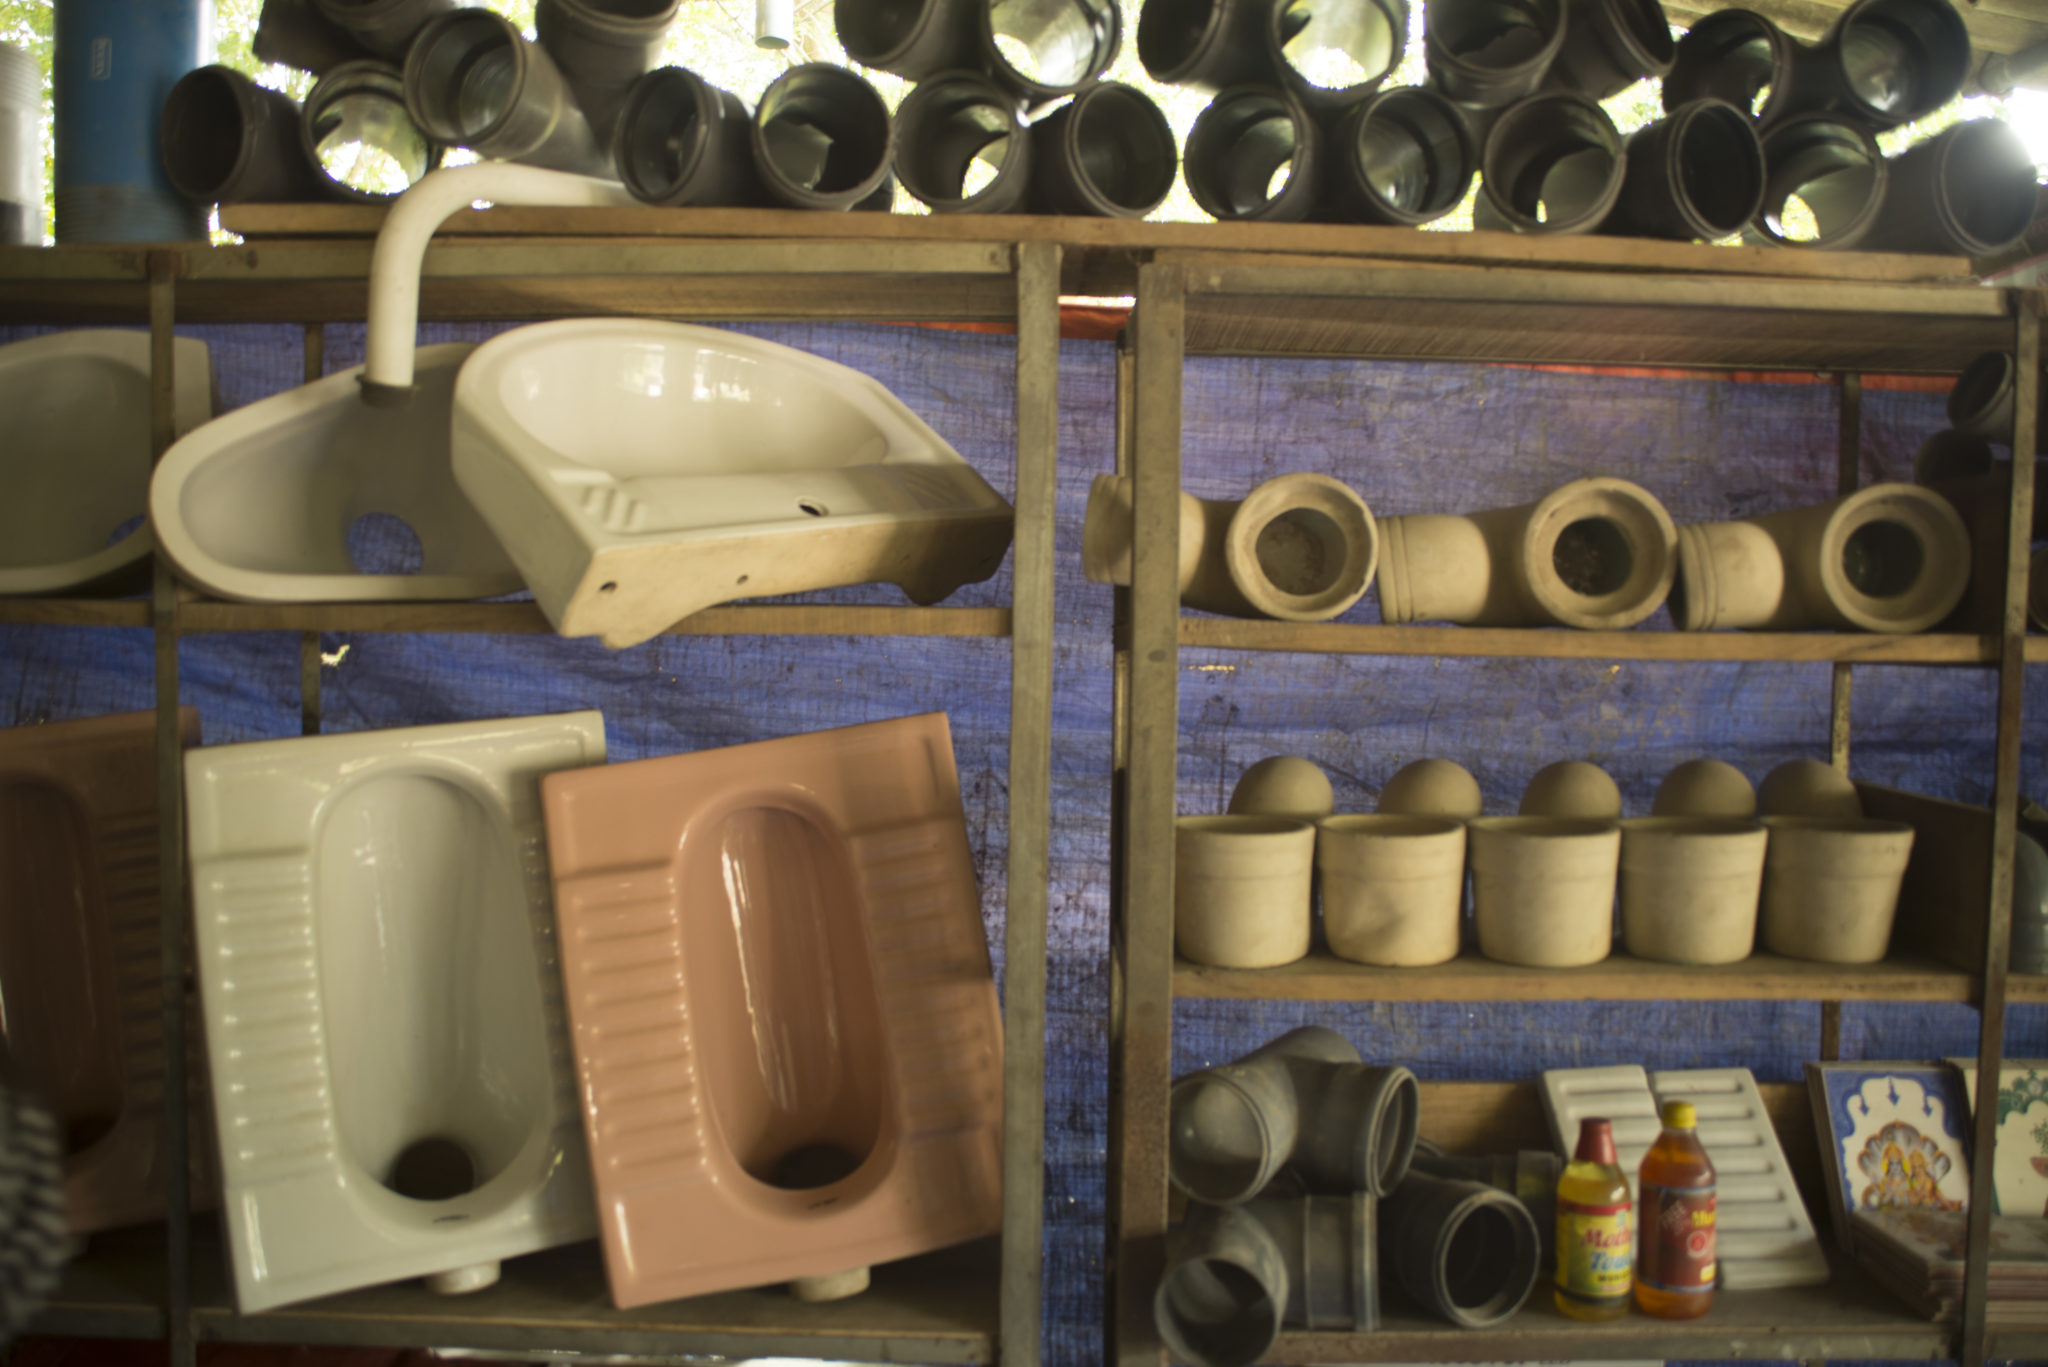 photograph of pipes, toilets, and a sink in a local shop